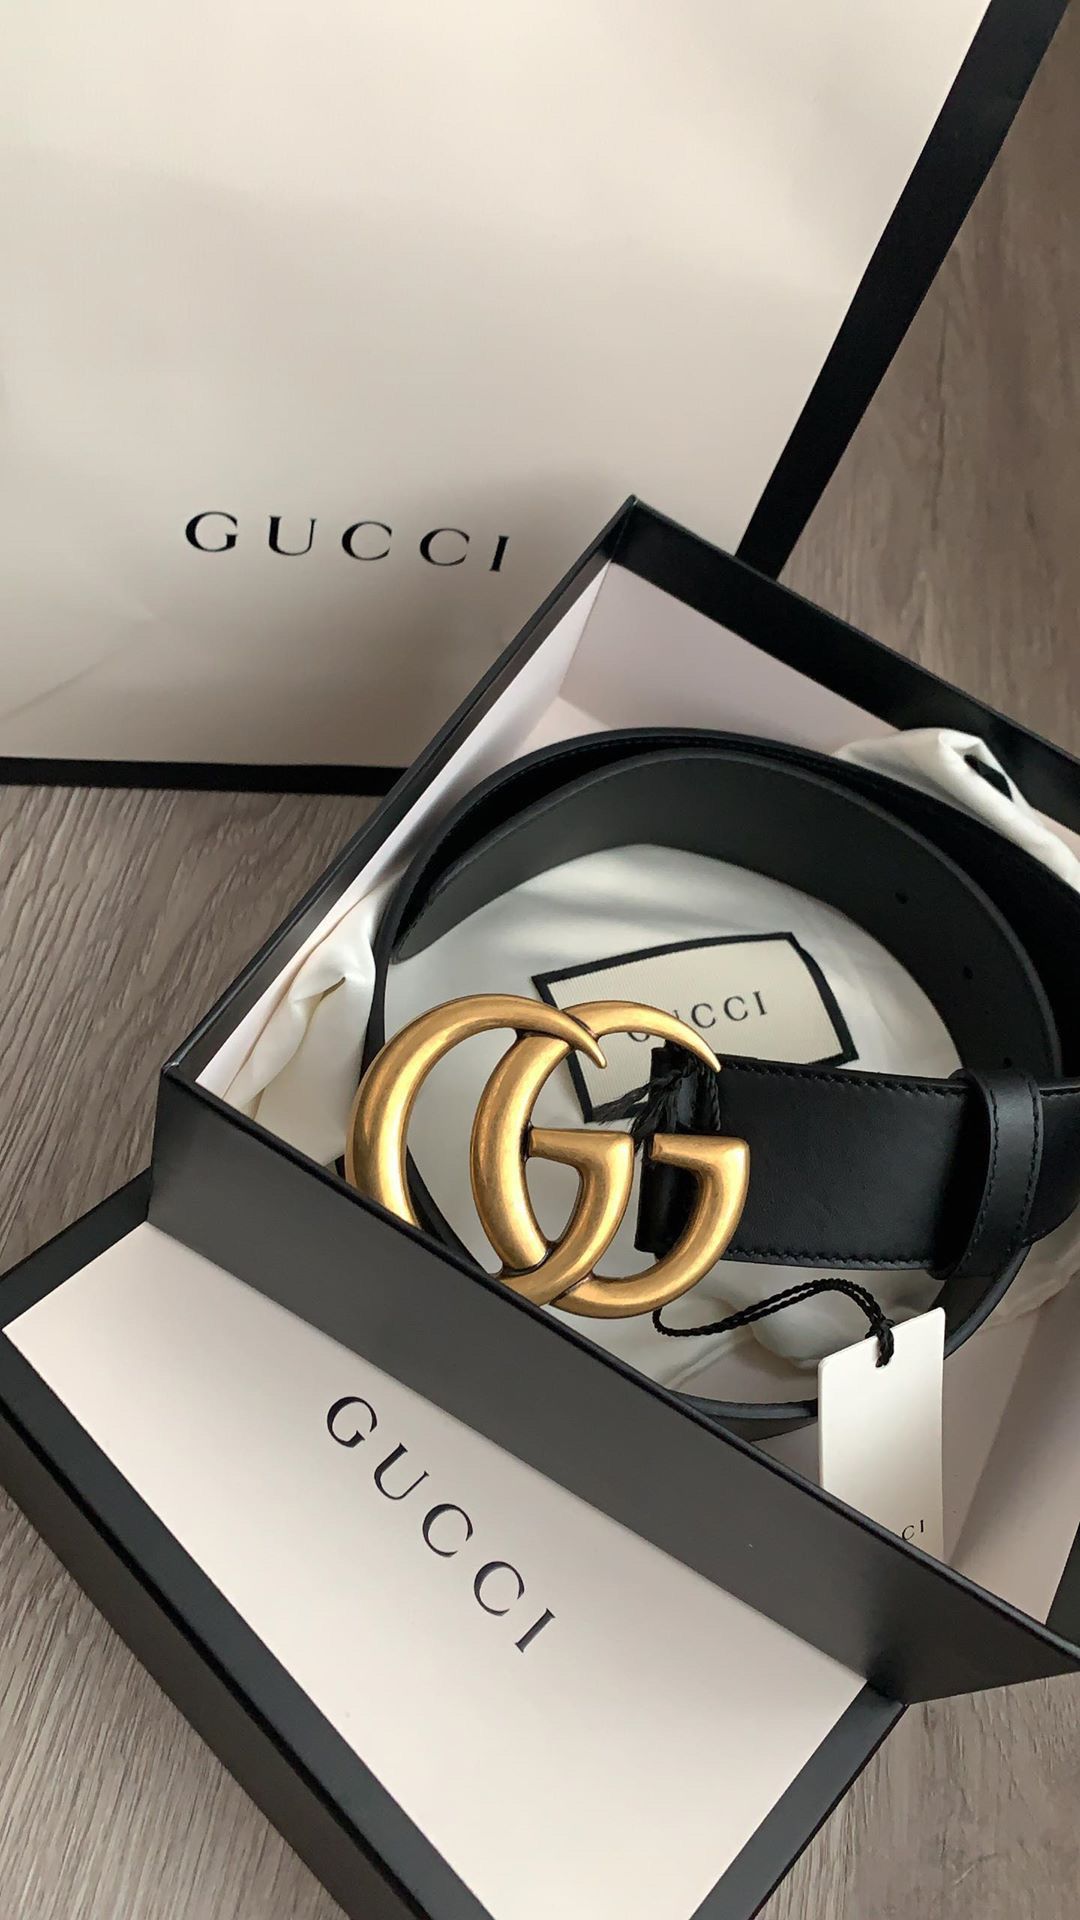 Gucci Belts: Iconic Accessories for the Fashion-forward Individual